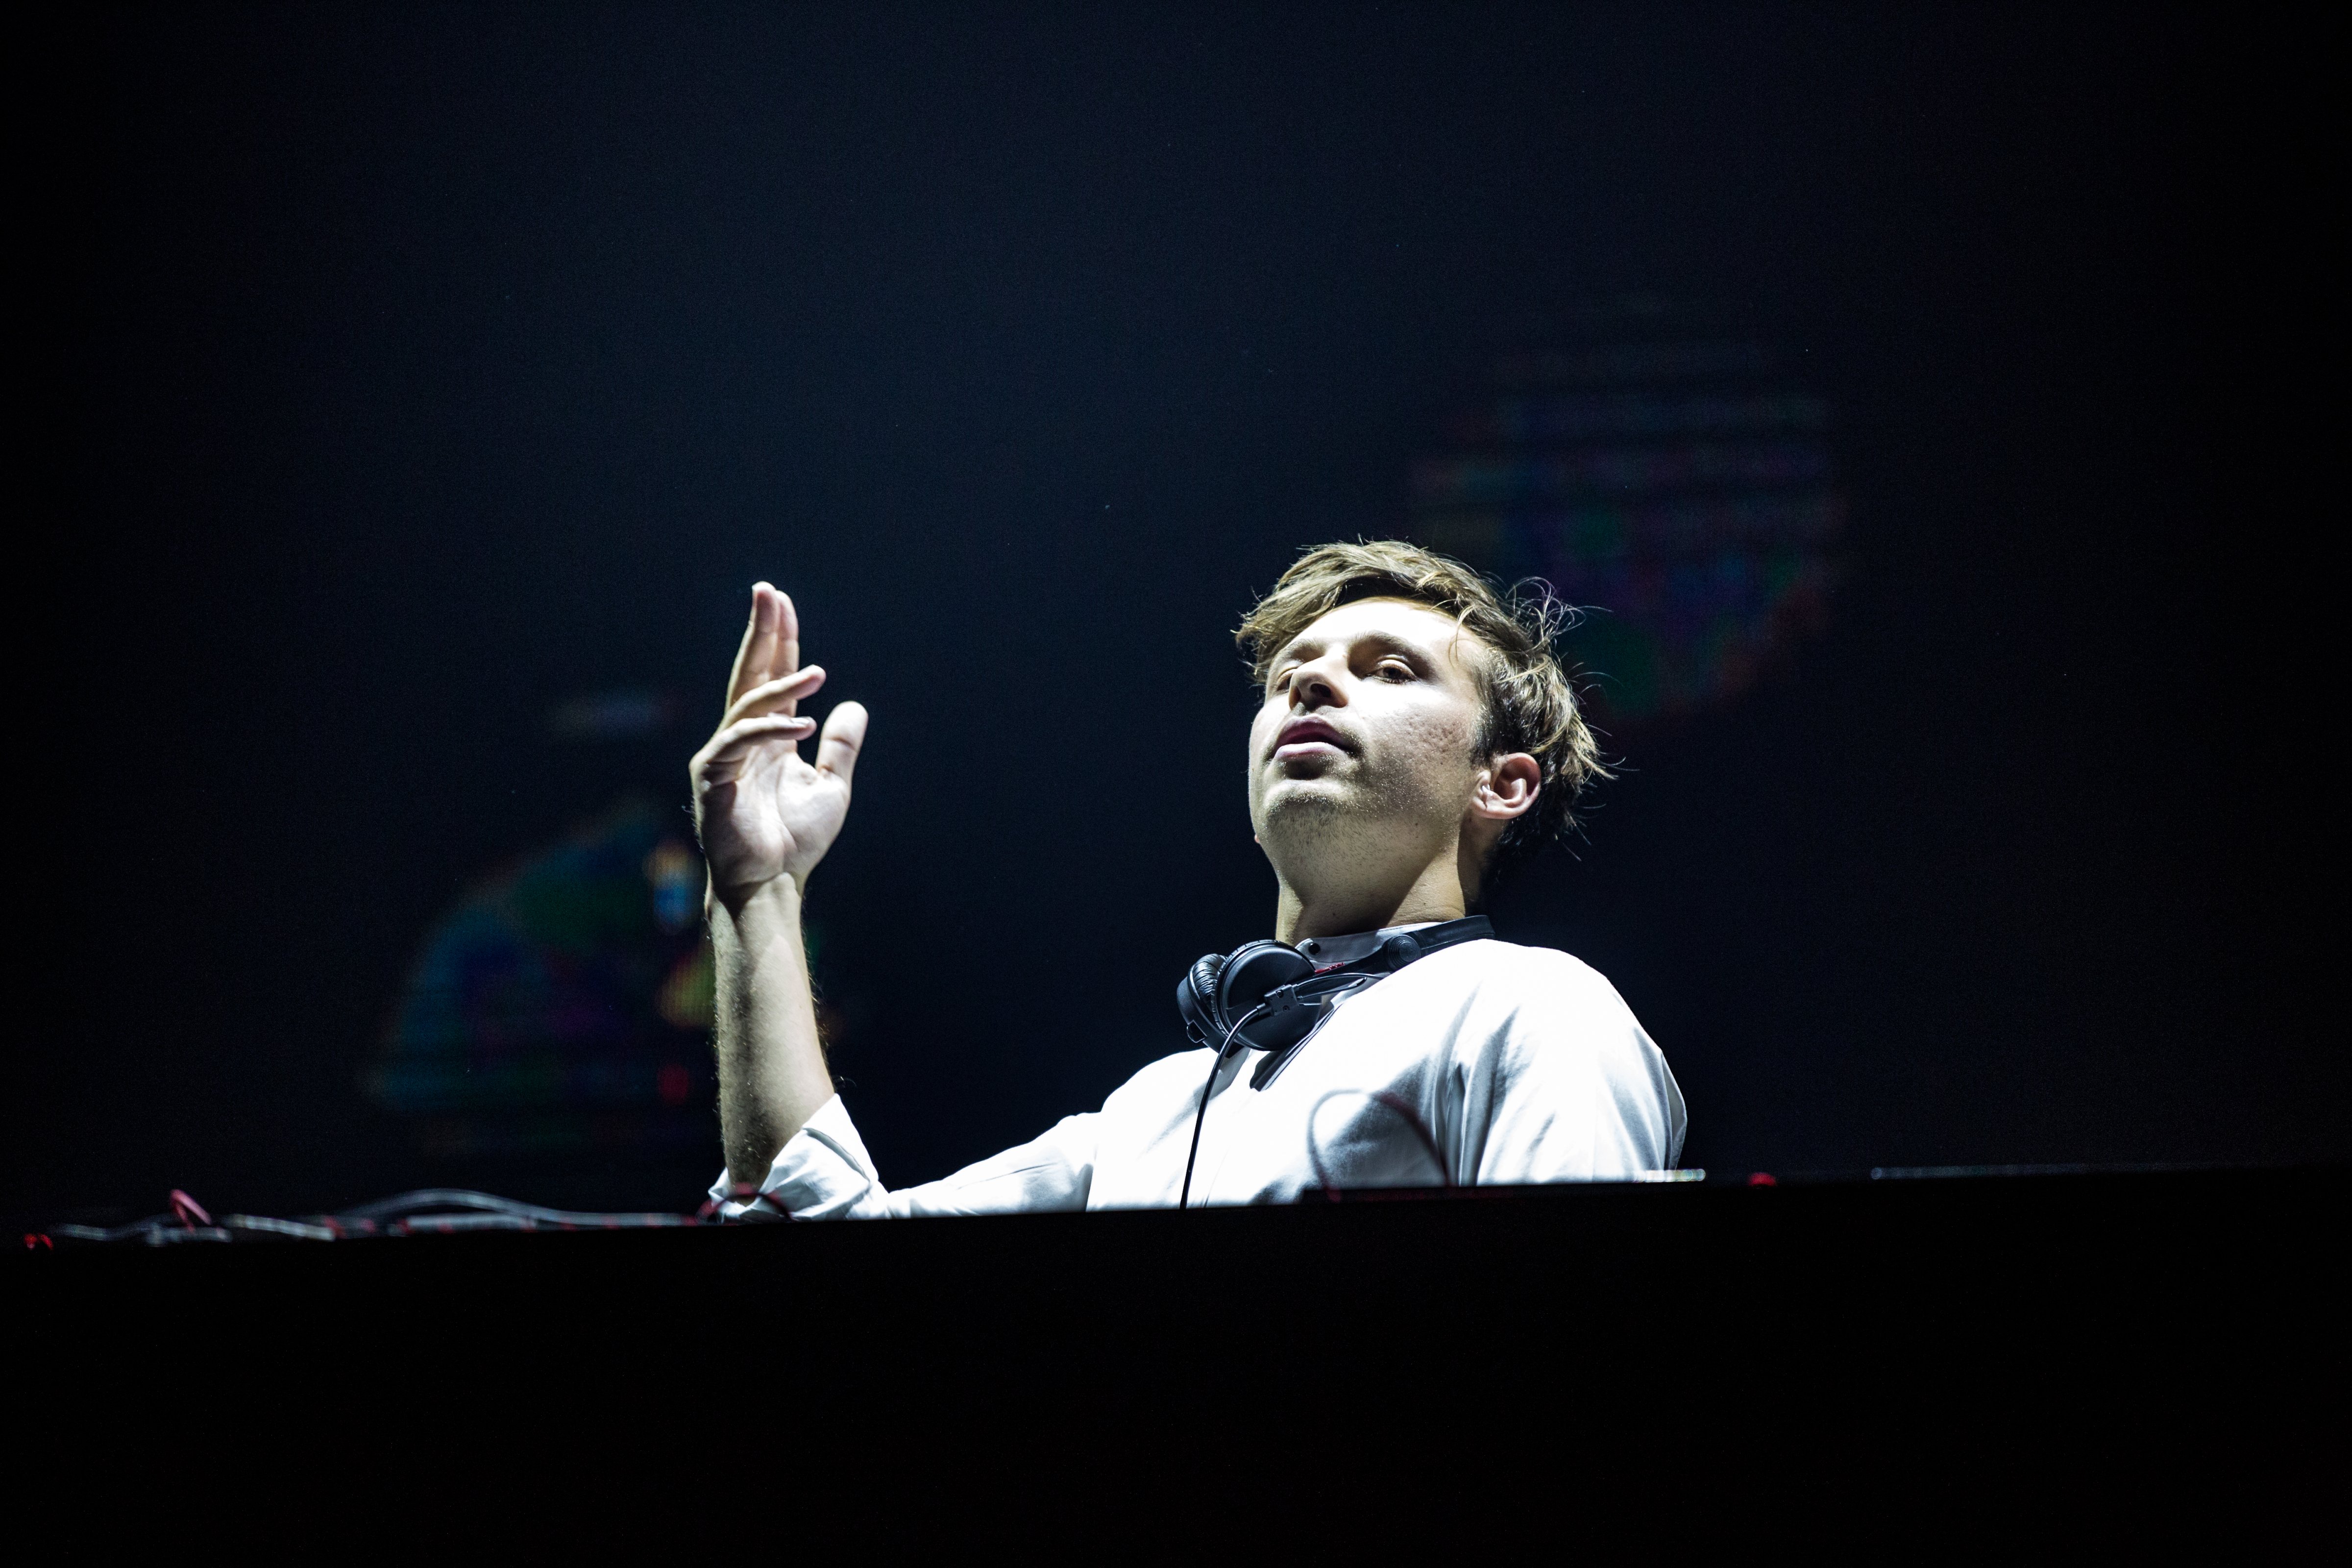 Flume performs at the Creamfields festival on Dec. 16, 2017 in Hong Kong. (Aria Chen -)